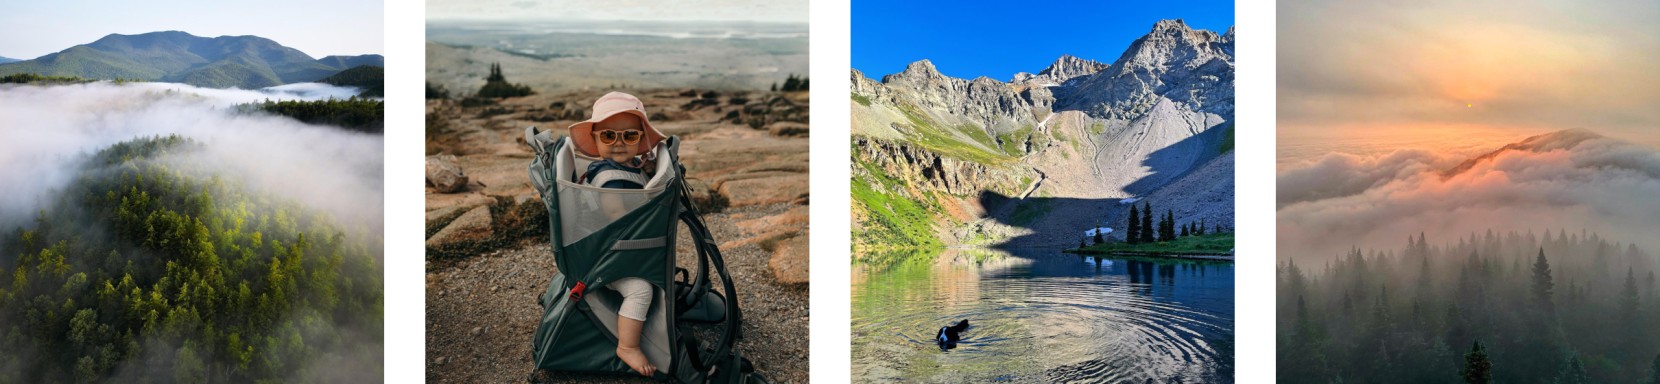 3 images of scenic panoramic mountains, and one image of a child wearing sunglasses and sun hat, sitting in a child carrier.